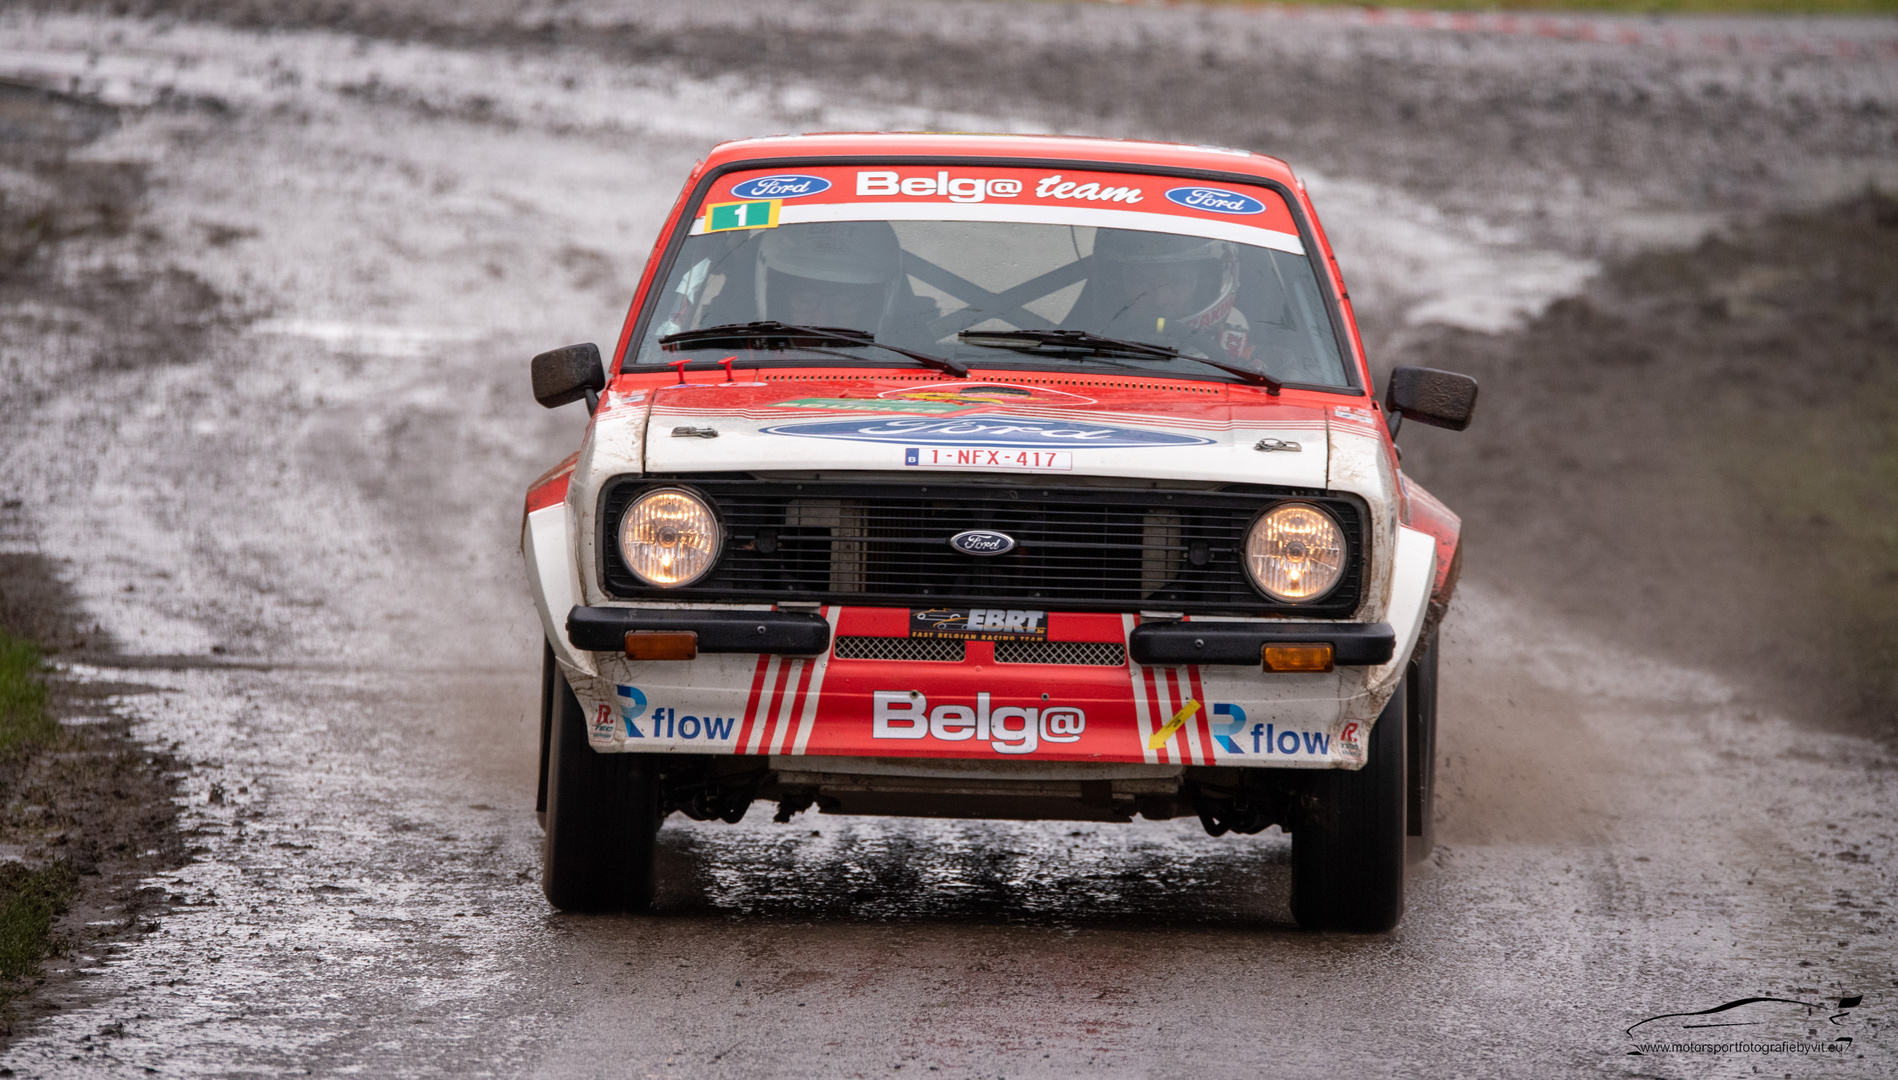 Ford Escort in Rallying Saison 2020 Part 14